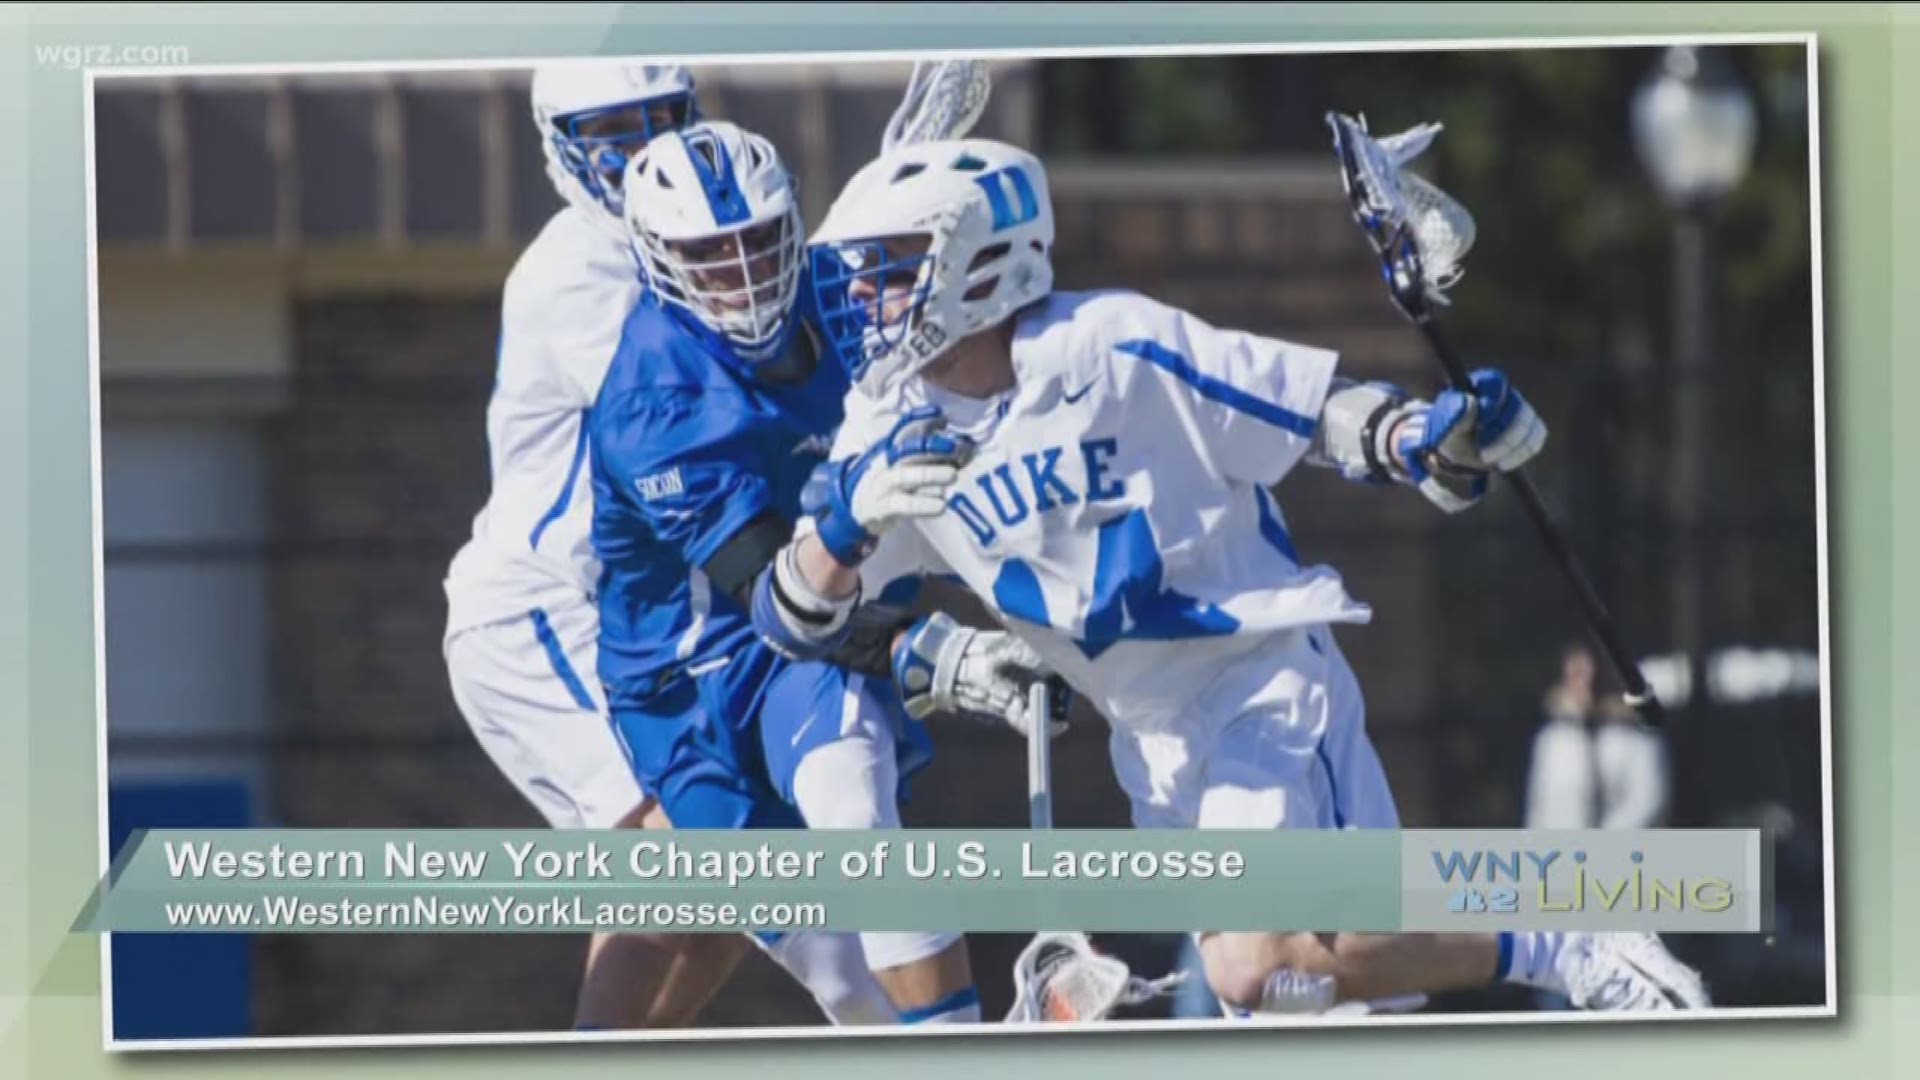 WNY Living - May 12 - WNY Chapter of US Lacrosse